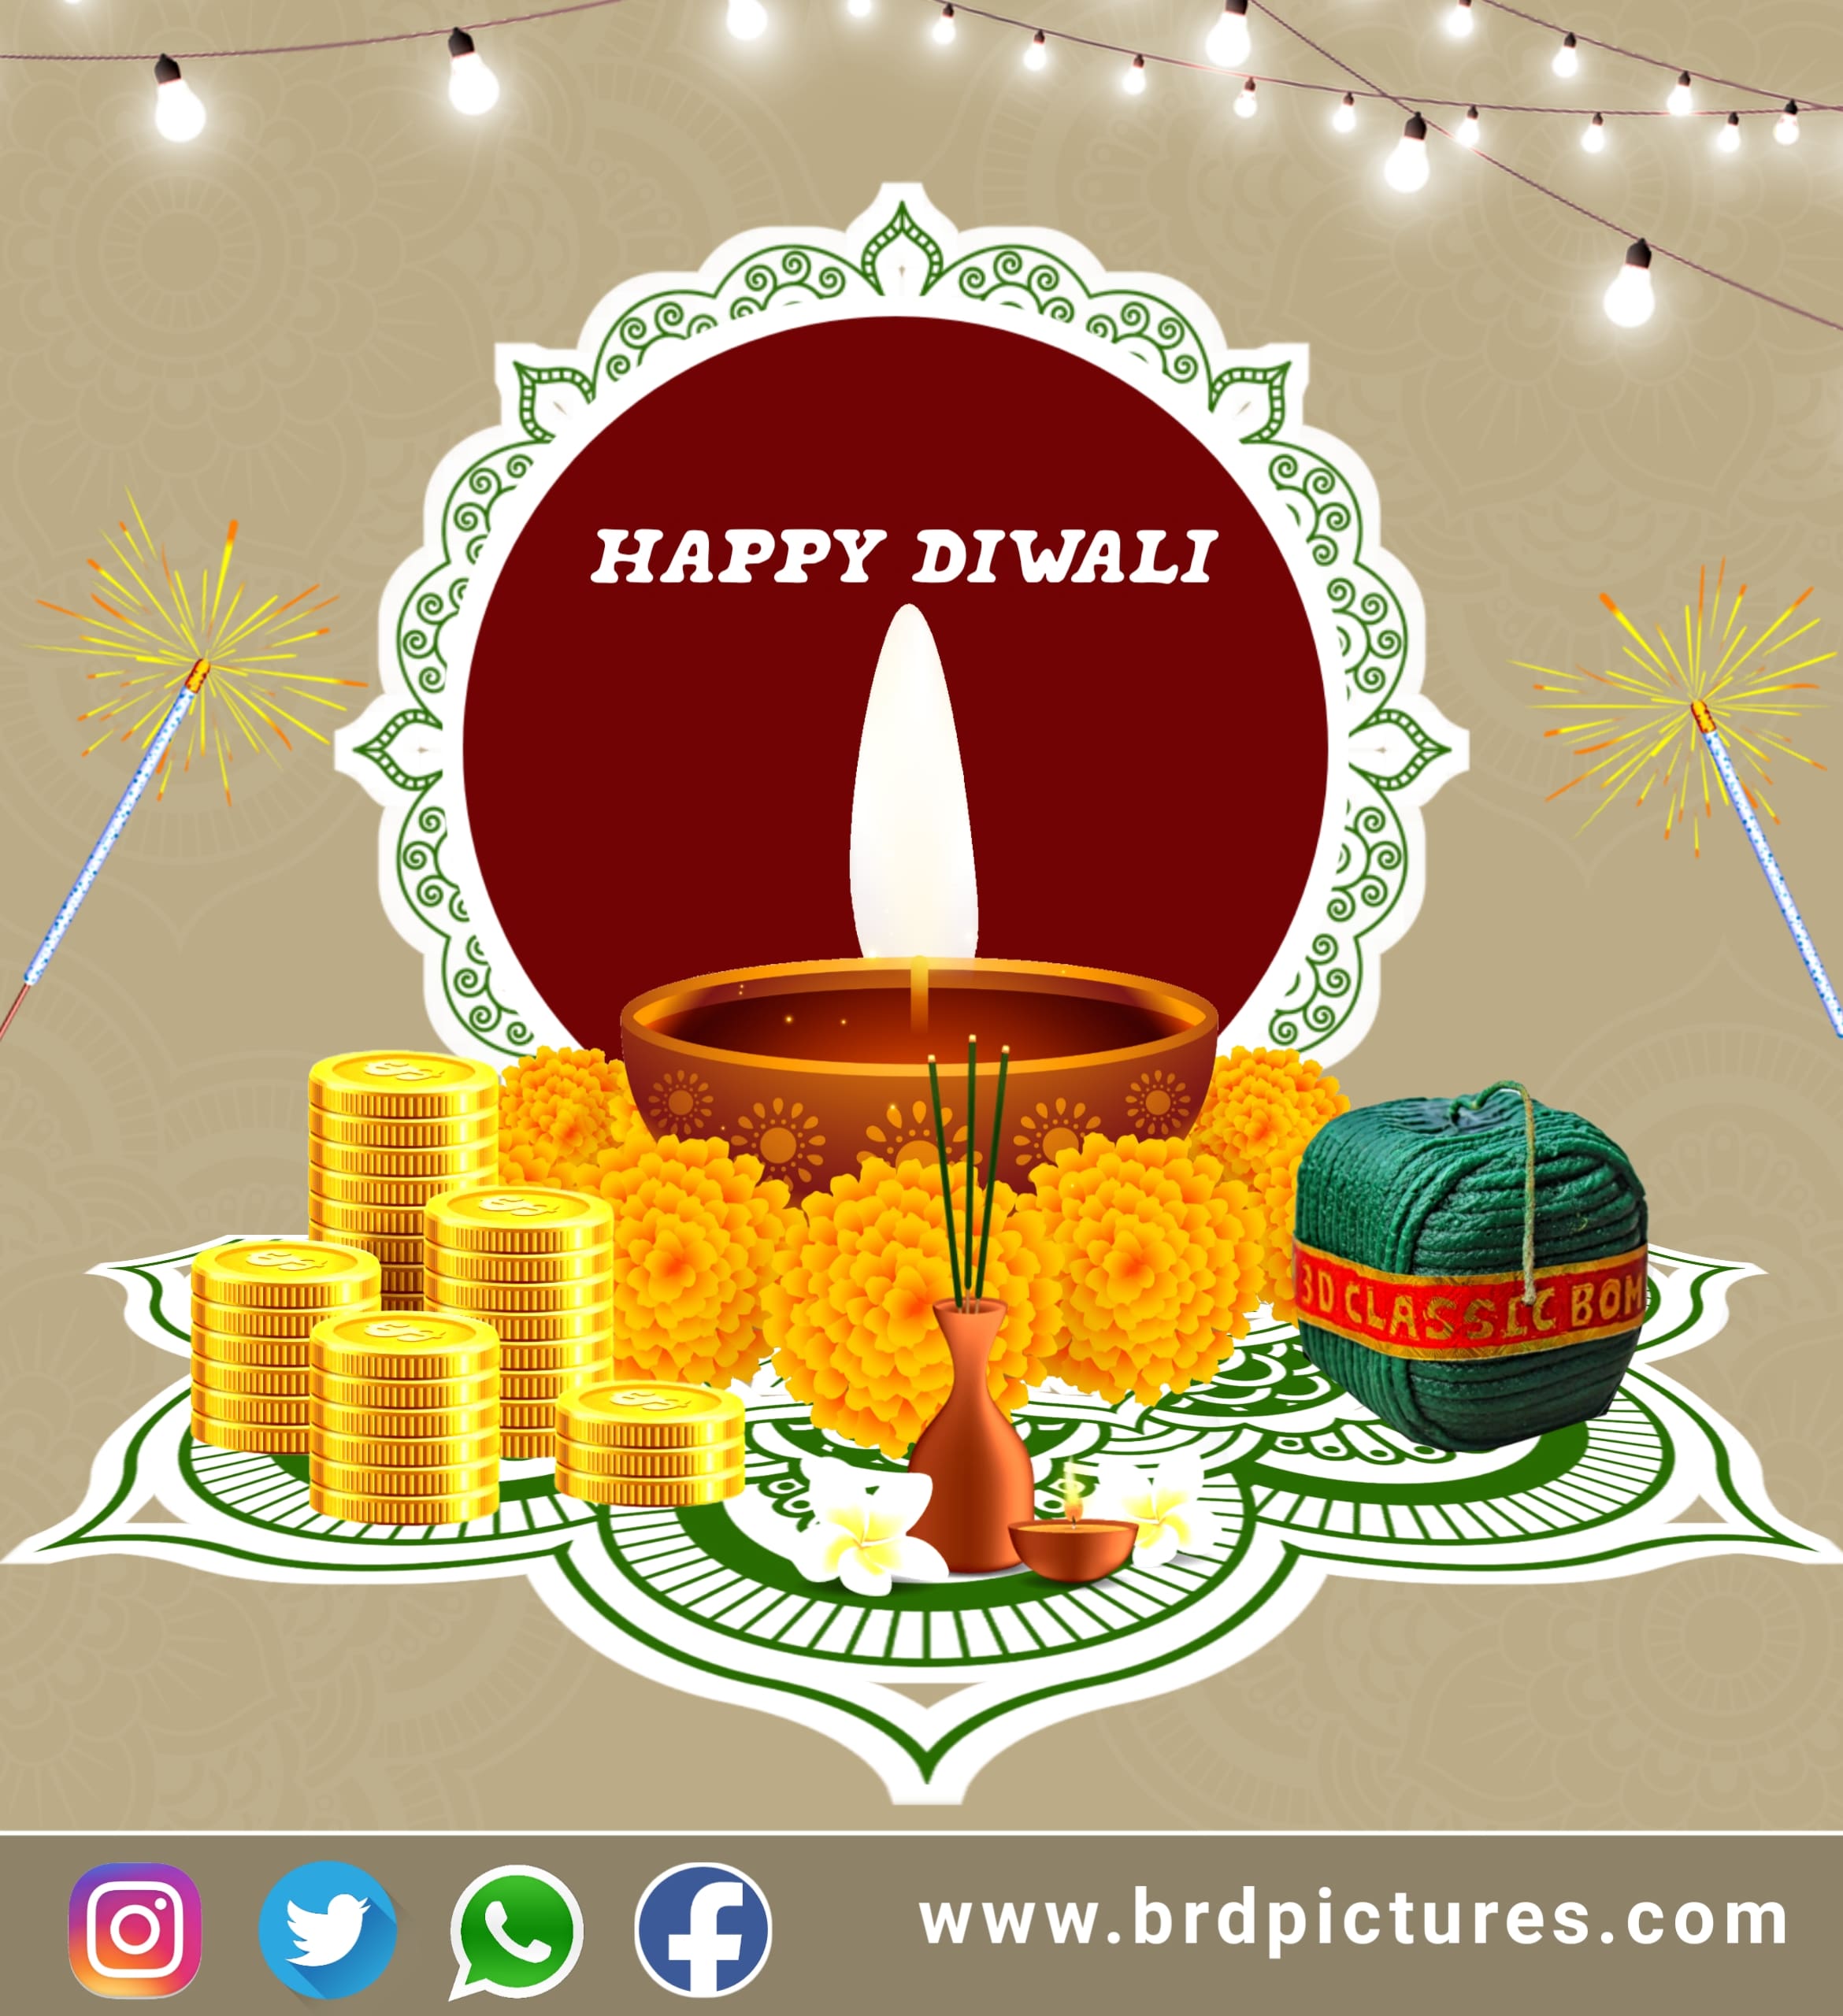 Happy Diwali Wishes Image By BRD Pictures 